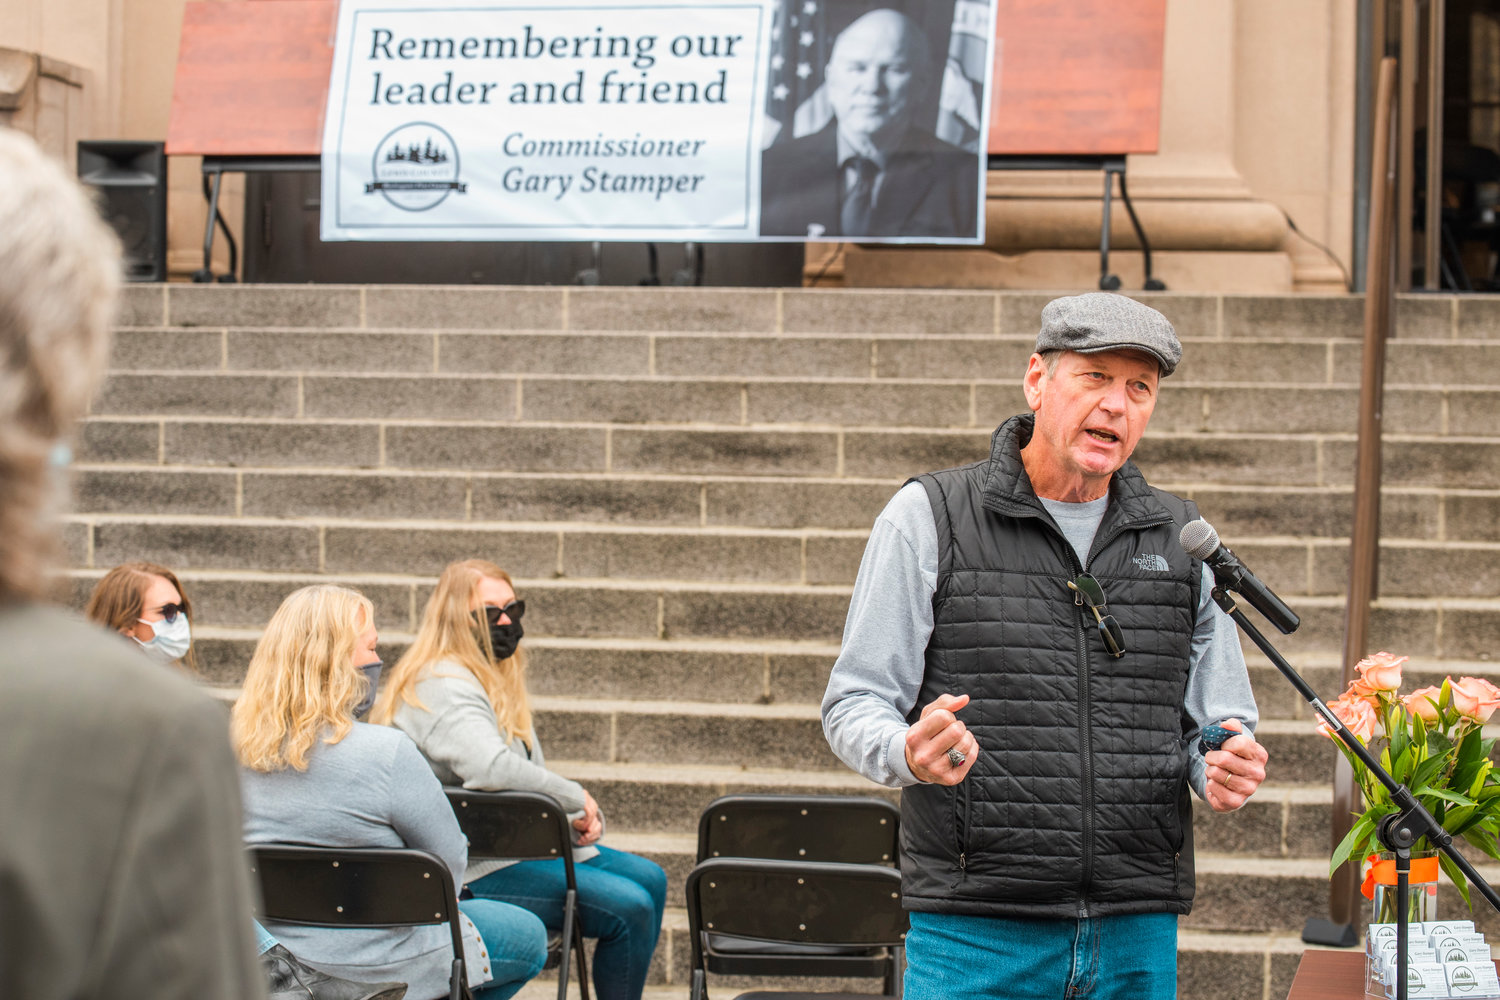 Chehalis Mayor Dennis Dawes talks about his relationship with Gary Stamper during a ceremony honoring his life Friday morning in Chehalis.